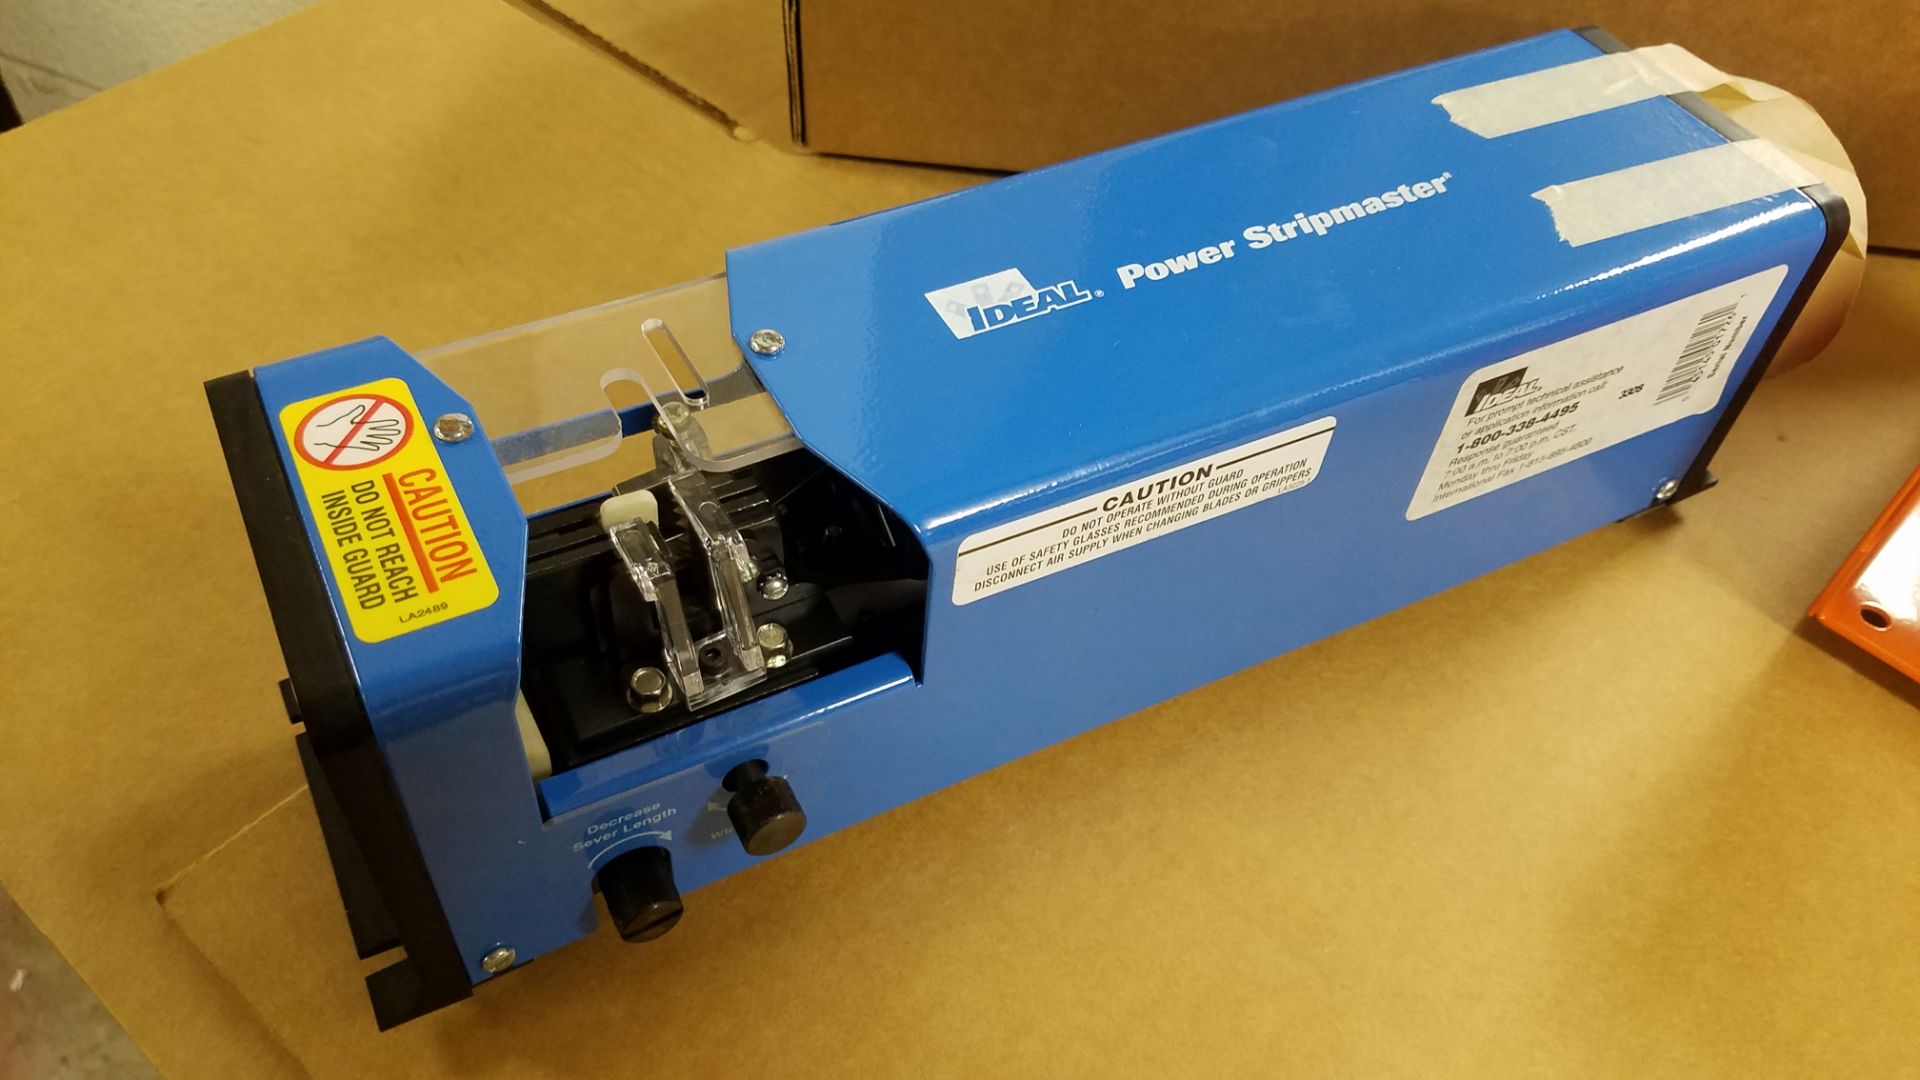 Ideal Model 45-145 Power Stripmaster, with Foot Pedal, Pneumatic, 16-26 AWG, New Condition - Image 2 of 2